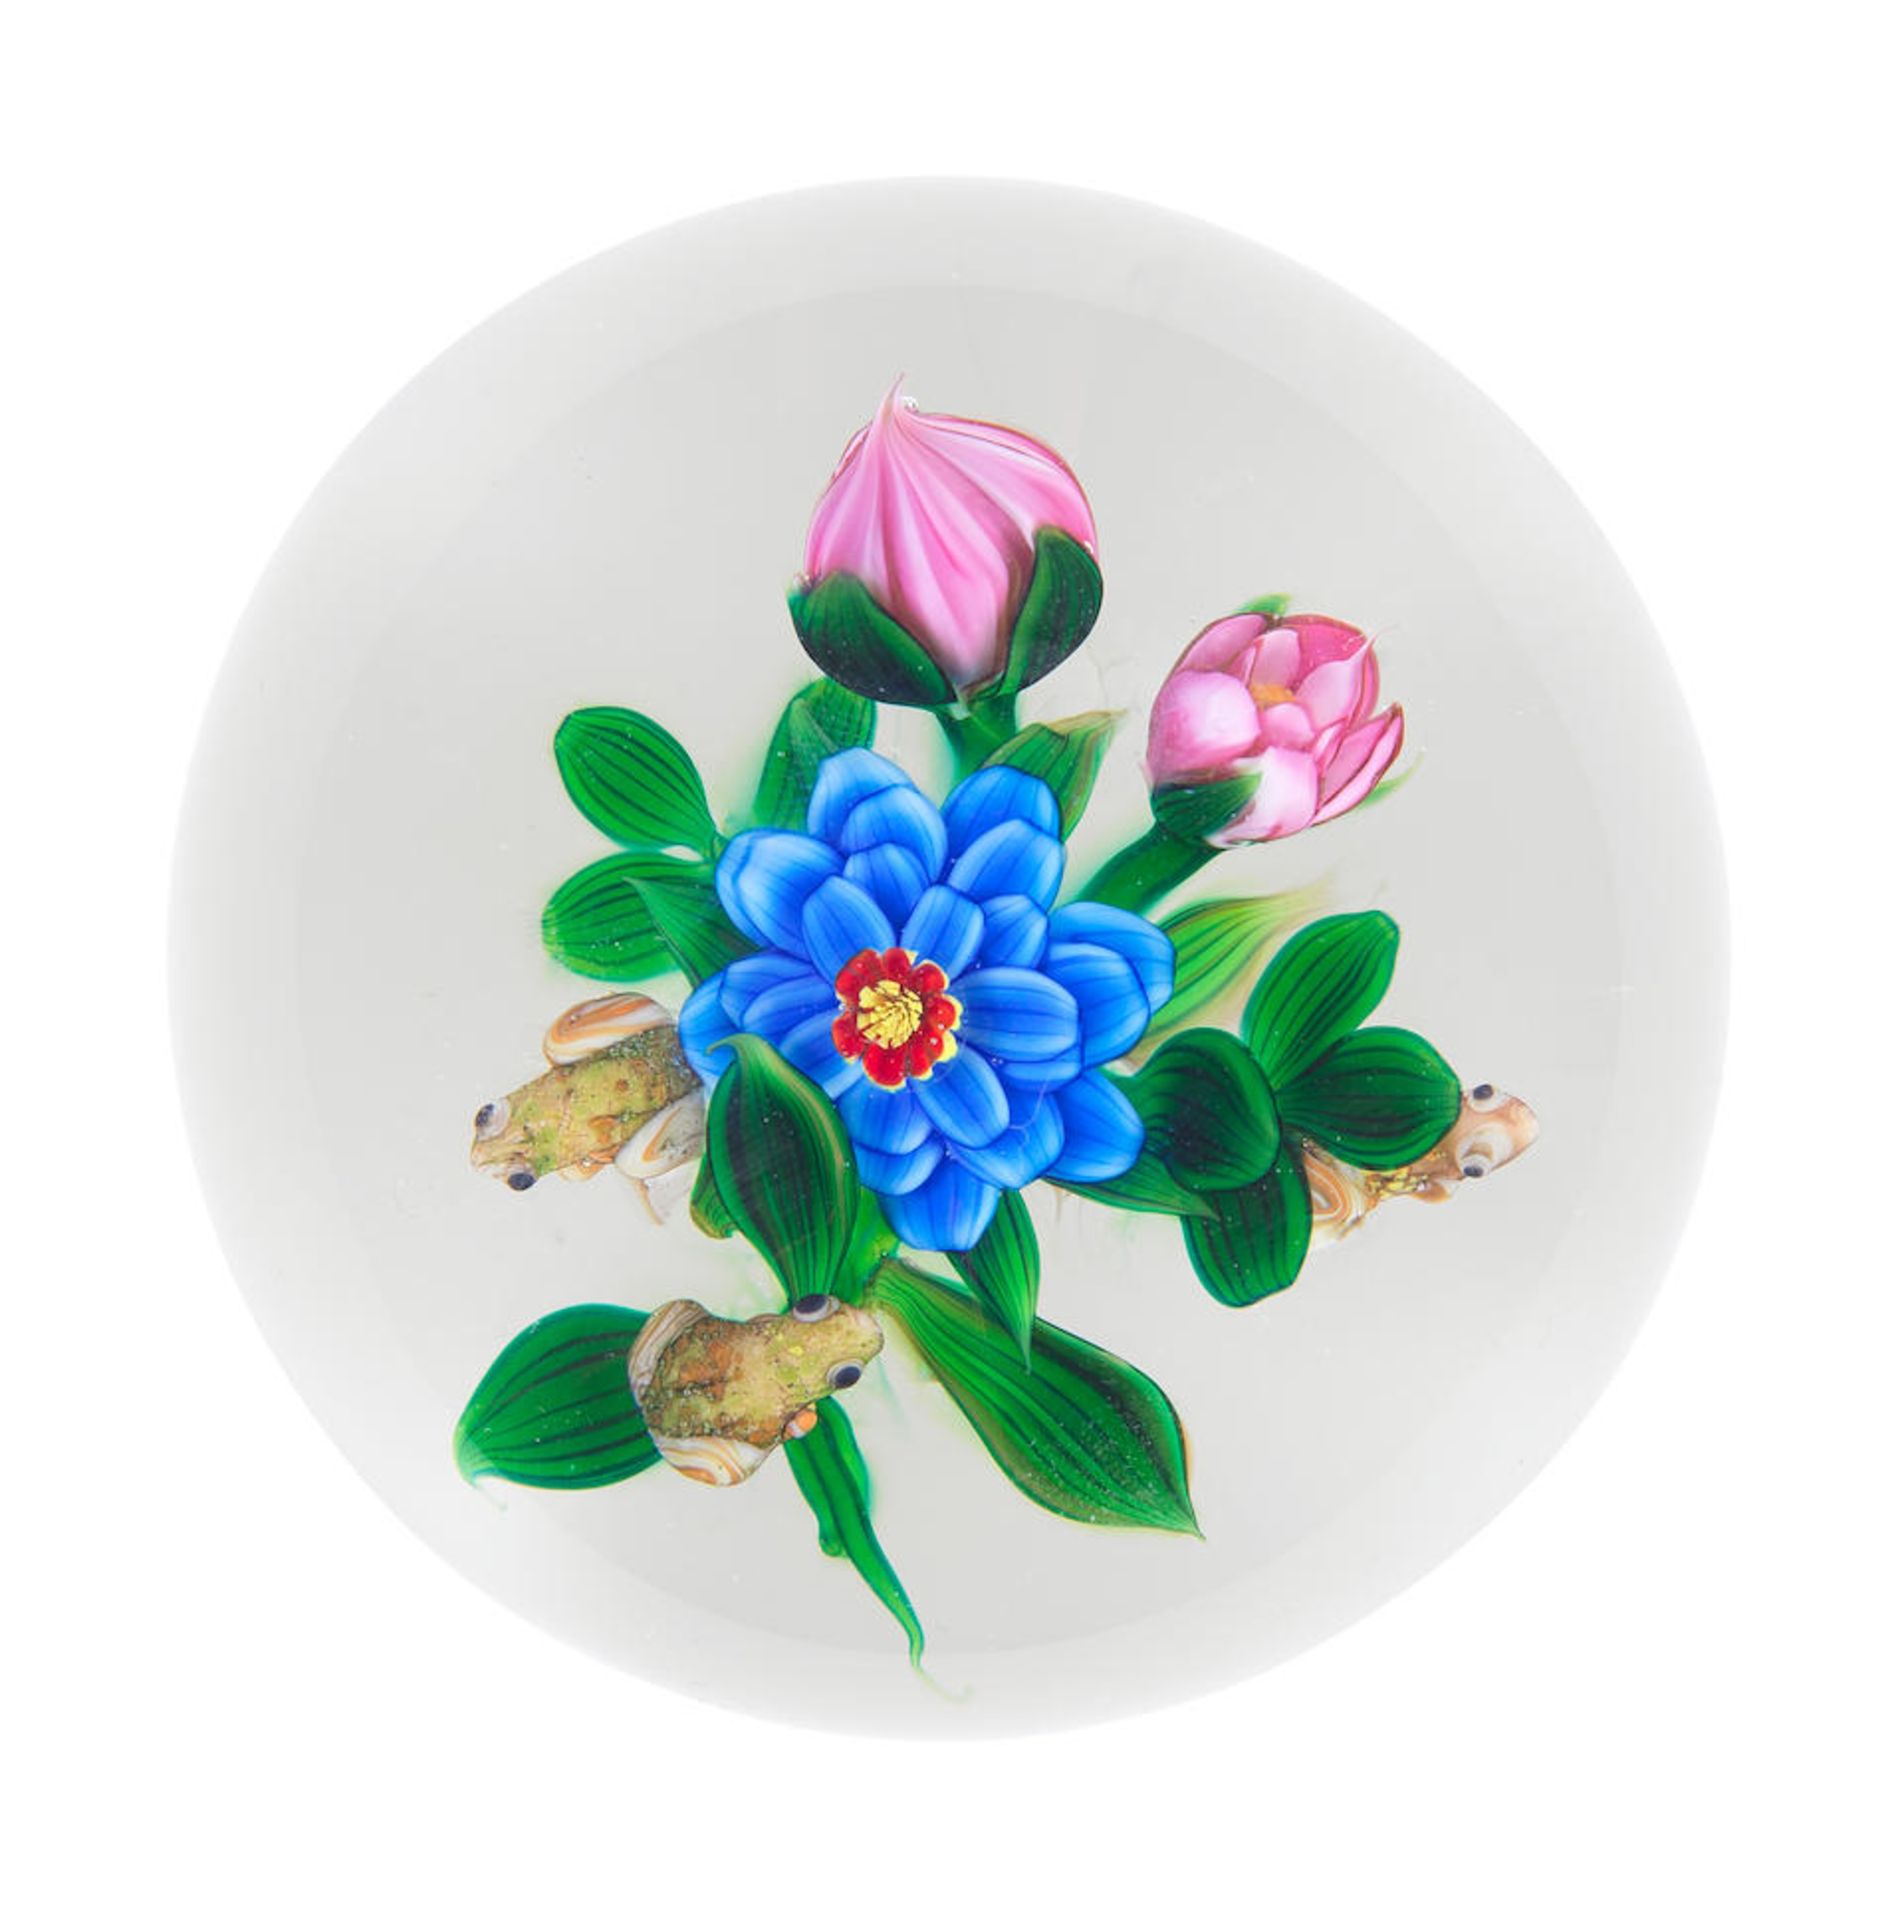 A Debbie Tarsitano frogs and floral bouquet magnum paperweight, circa 1995